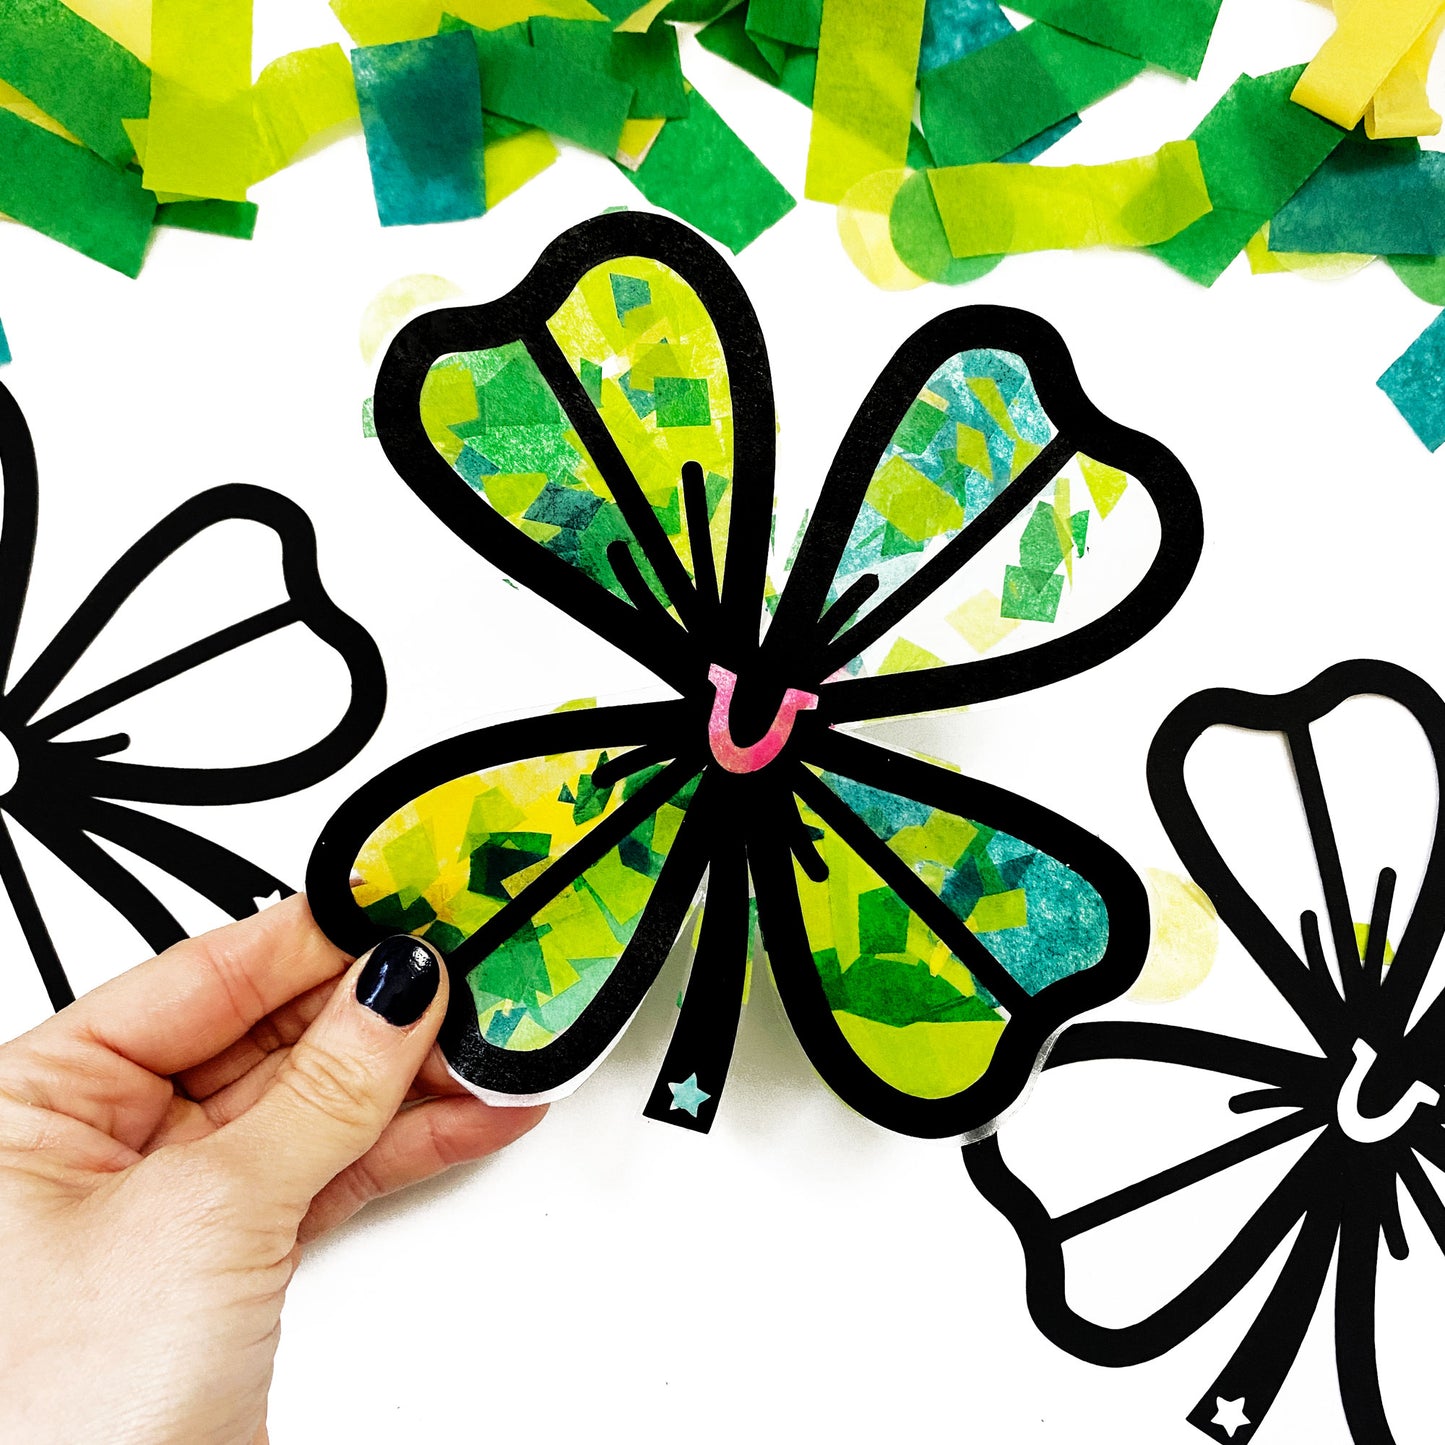 Paper shamrock craft for St. Patricks Day party.